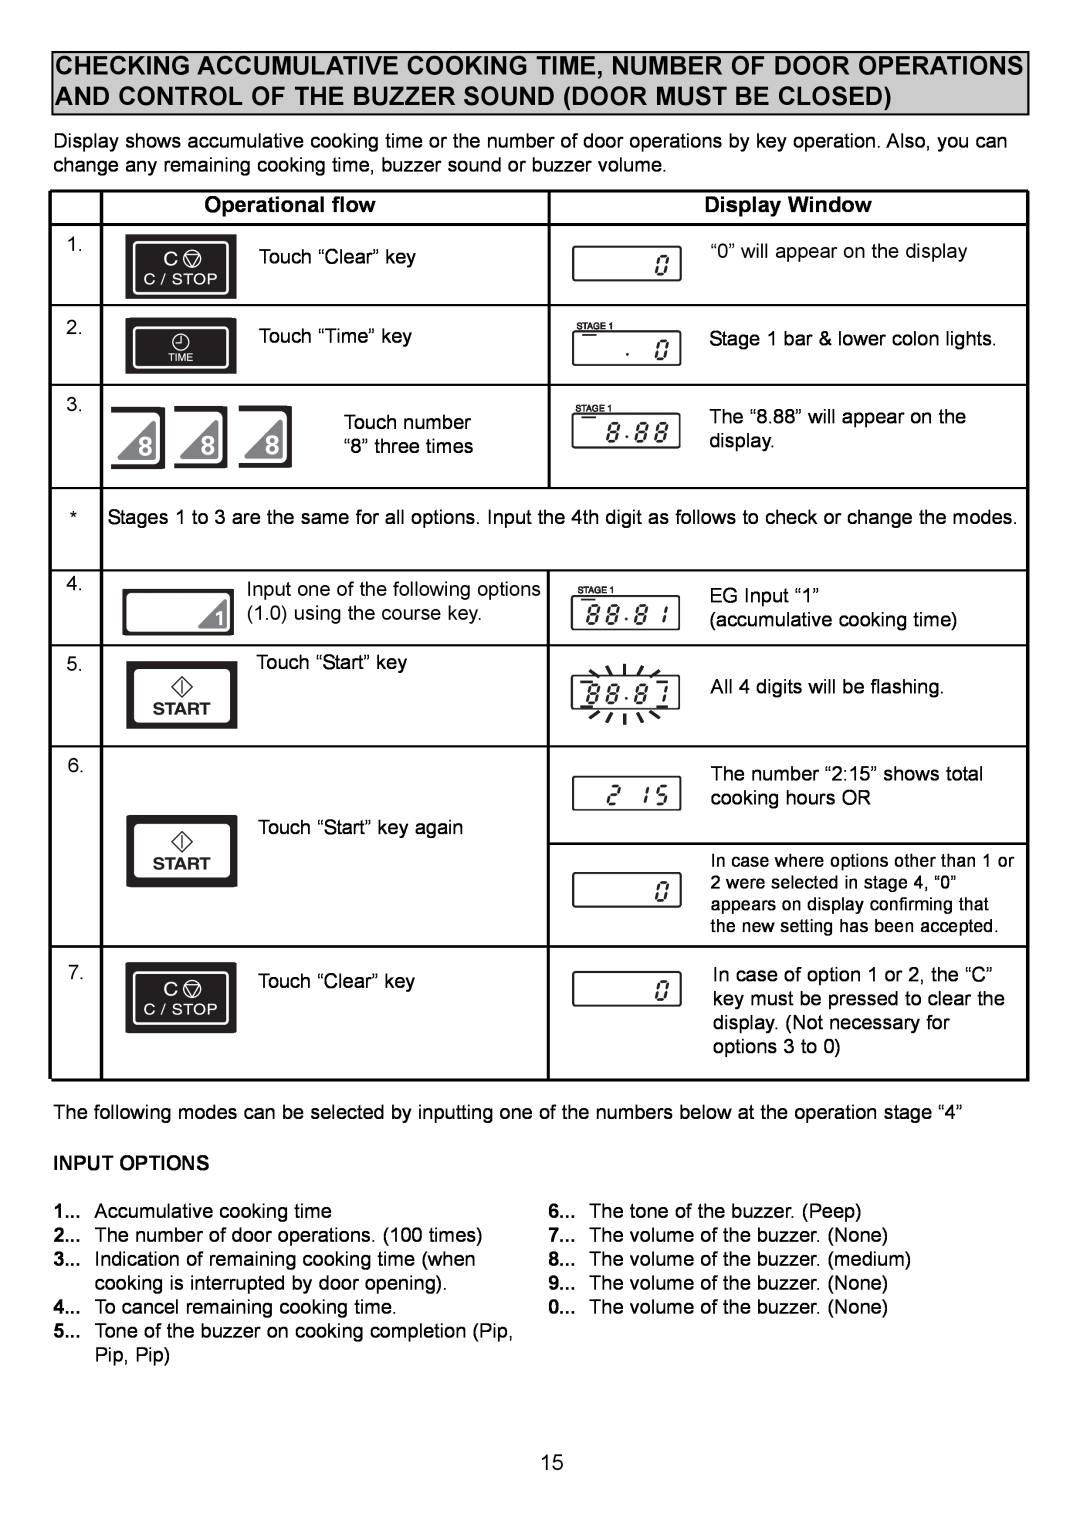 Sanyo EM-S1000 instruction manual Input Options, In case where options other than 1 or, were selected in stage 4, “0” 